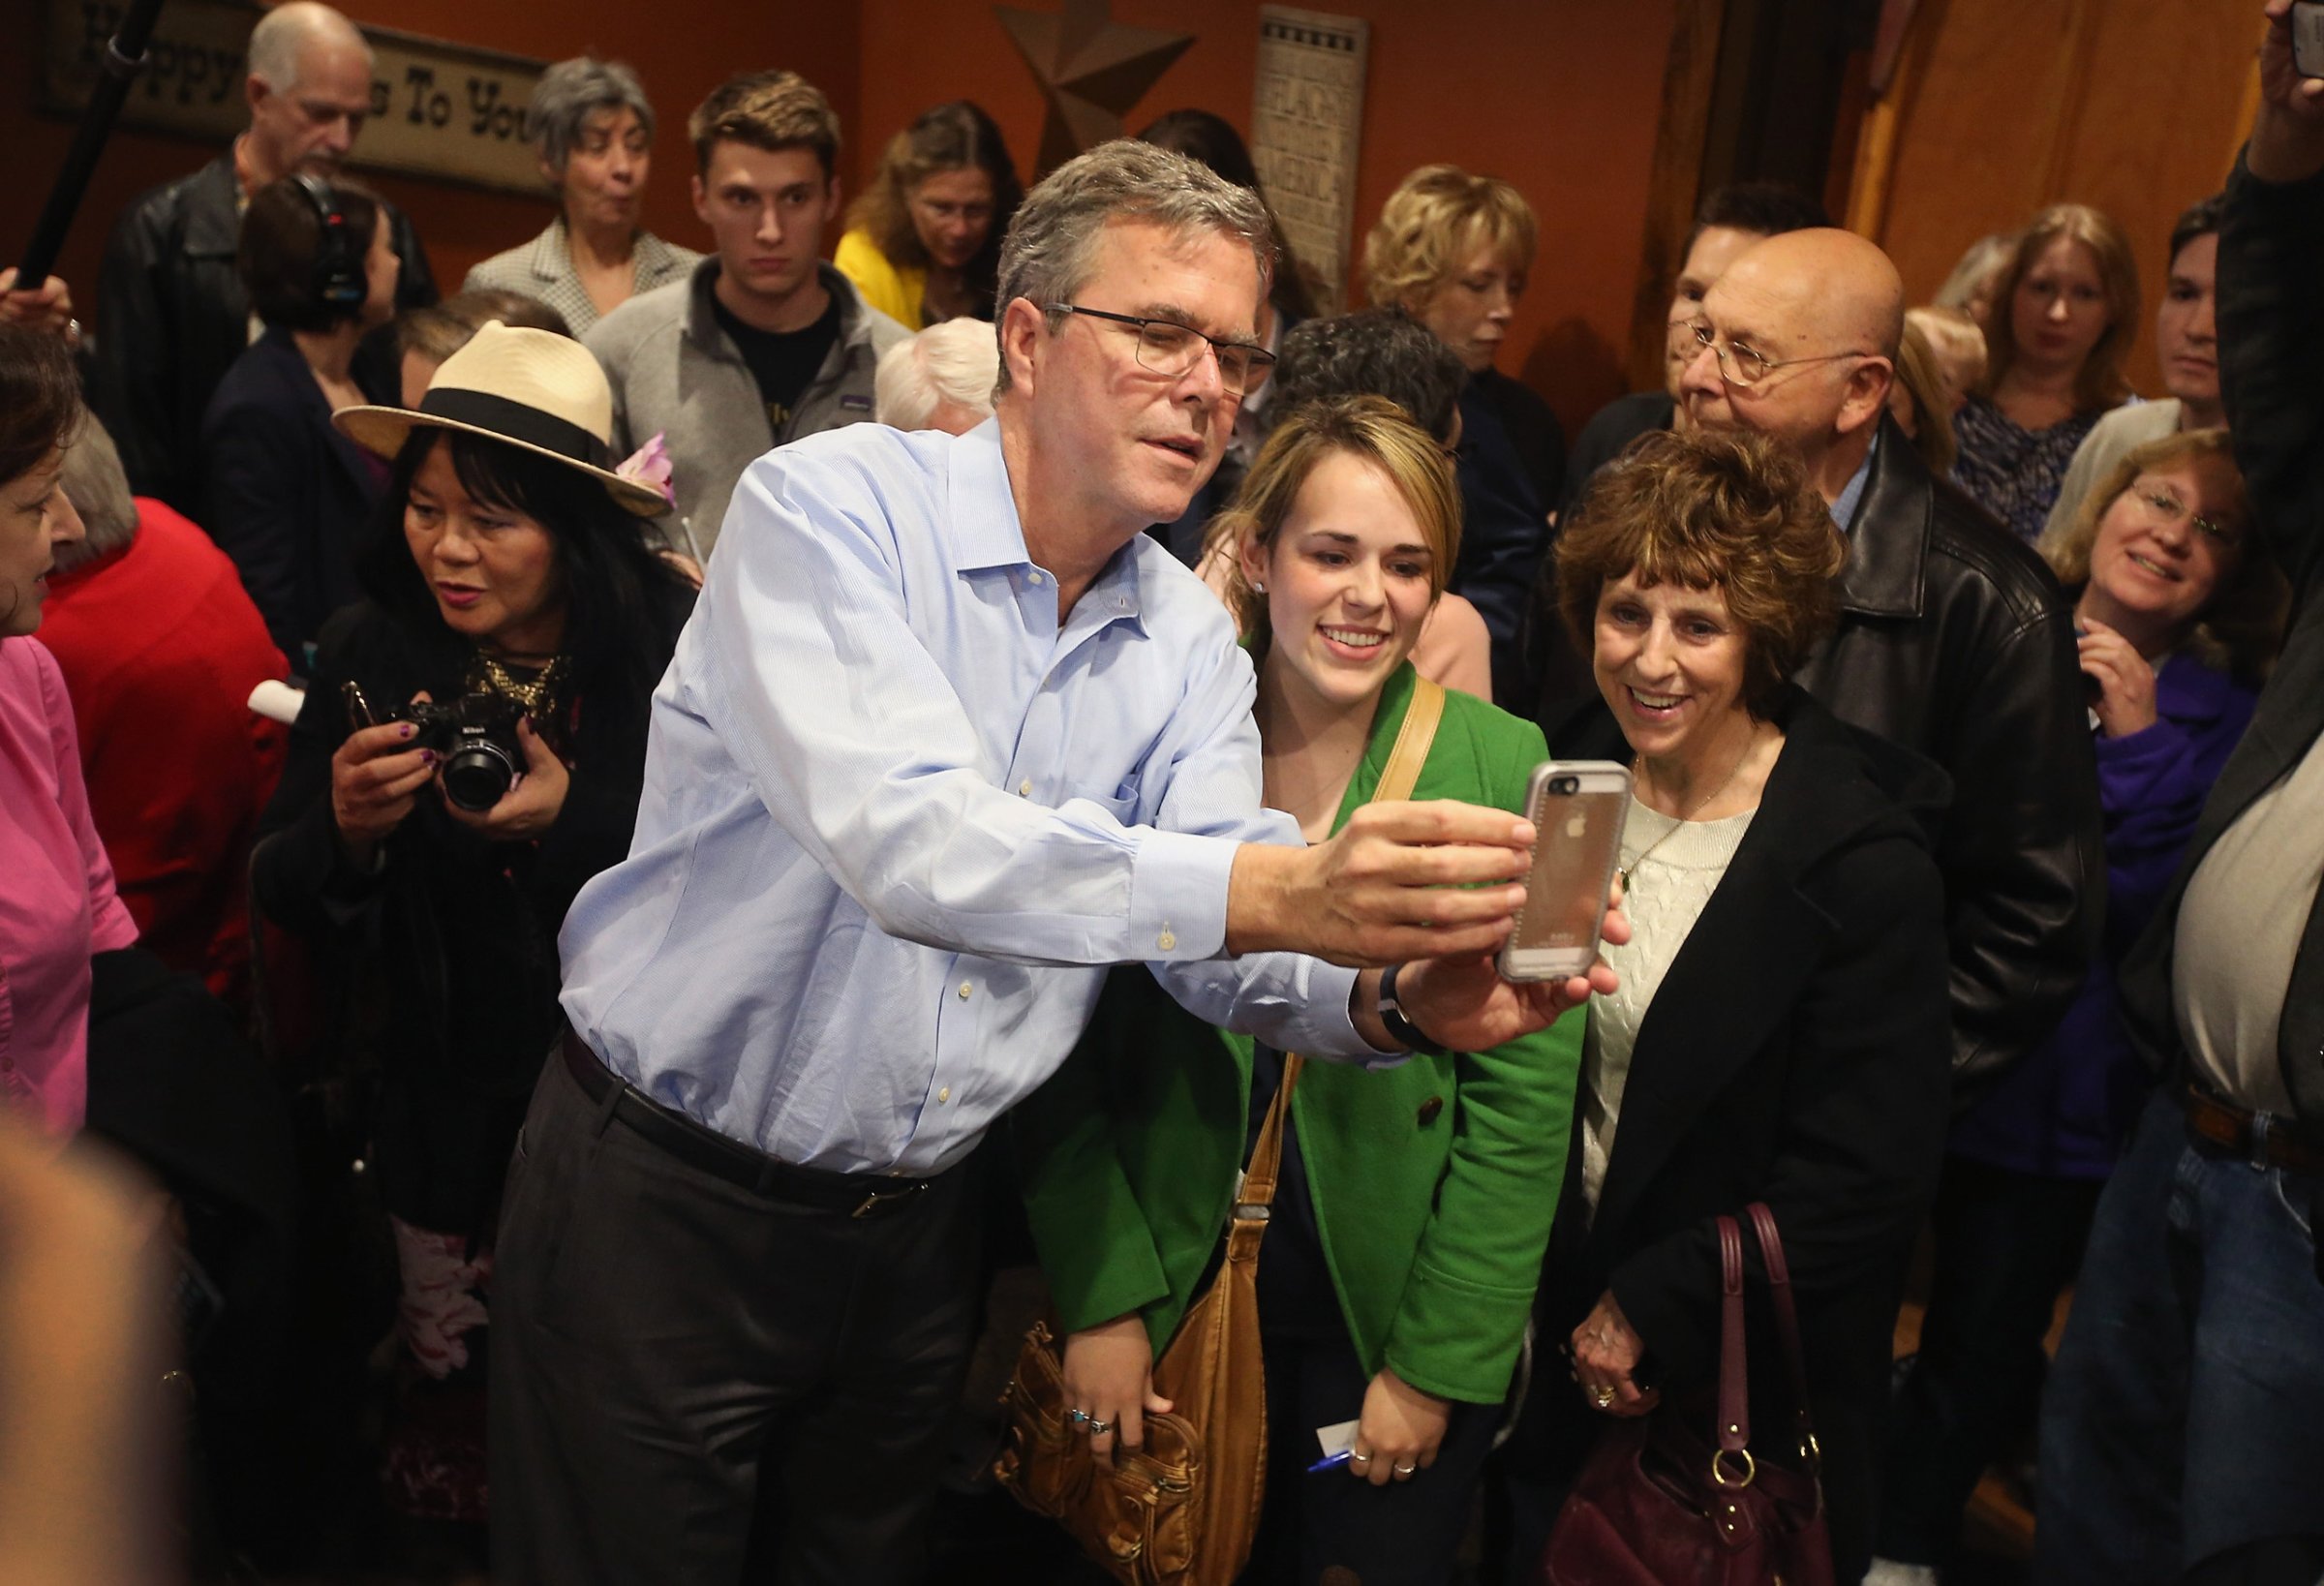 CEDAR RAPIDS, IA - MARCH 07: Former Florida Governor Jeb Bush takes a selfie with Iowa residents after speaking at a Pizza Ranch restaurant on March 7, 2015 in Cedar Rapids, Iowa. Earlier in the day Bush spoke at the Iowa Ag summit in Des Moines. The Ag Summit allowed the invited speakers, many of whom are potential 2016 Republican presidential hopefuls, to outline their views on agricultural issues. (Photo by Scott Olson/Getty Images)